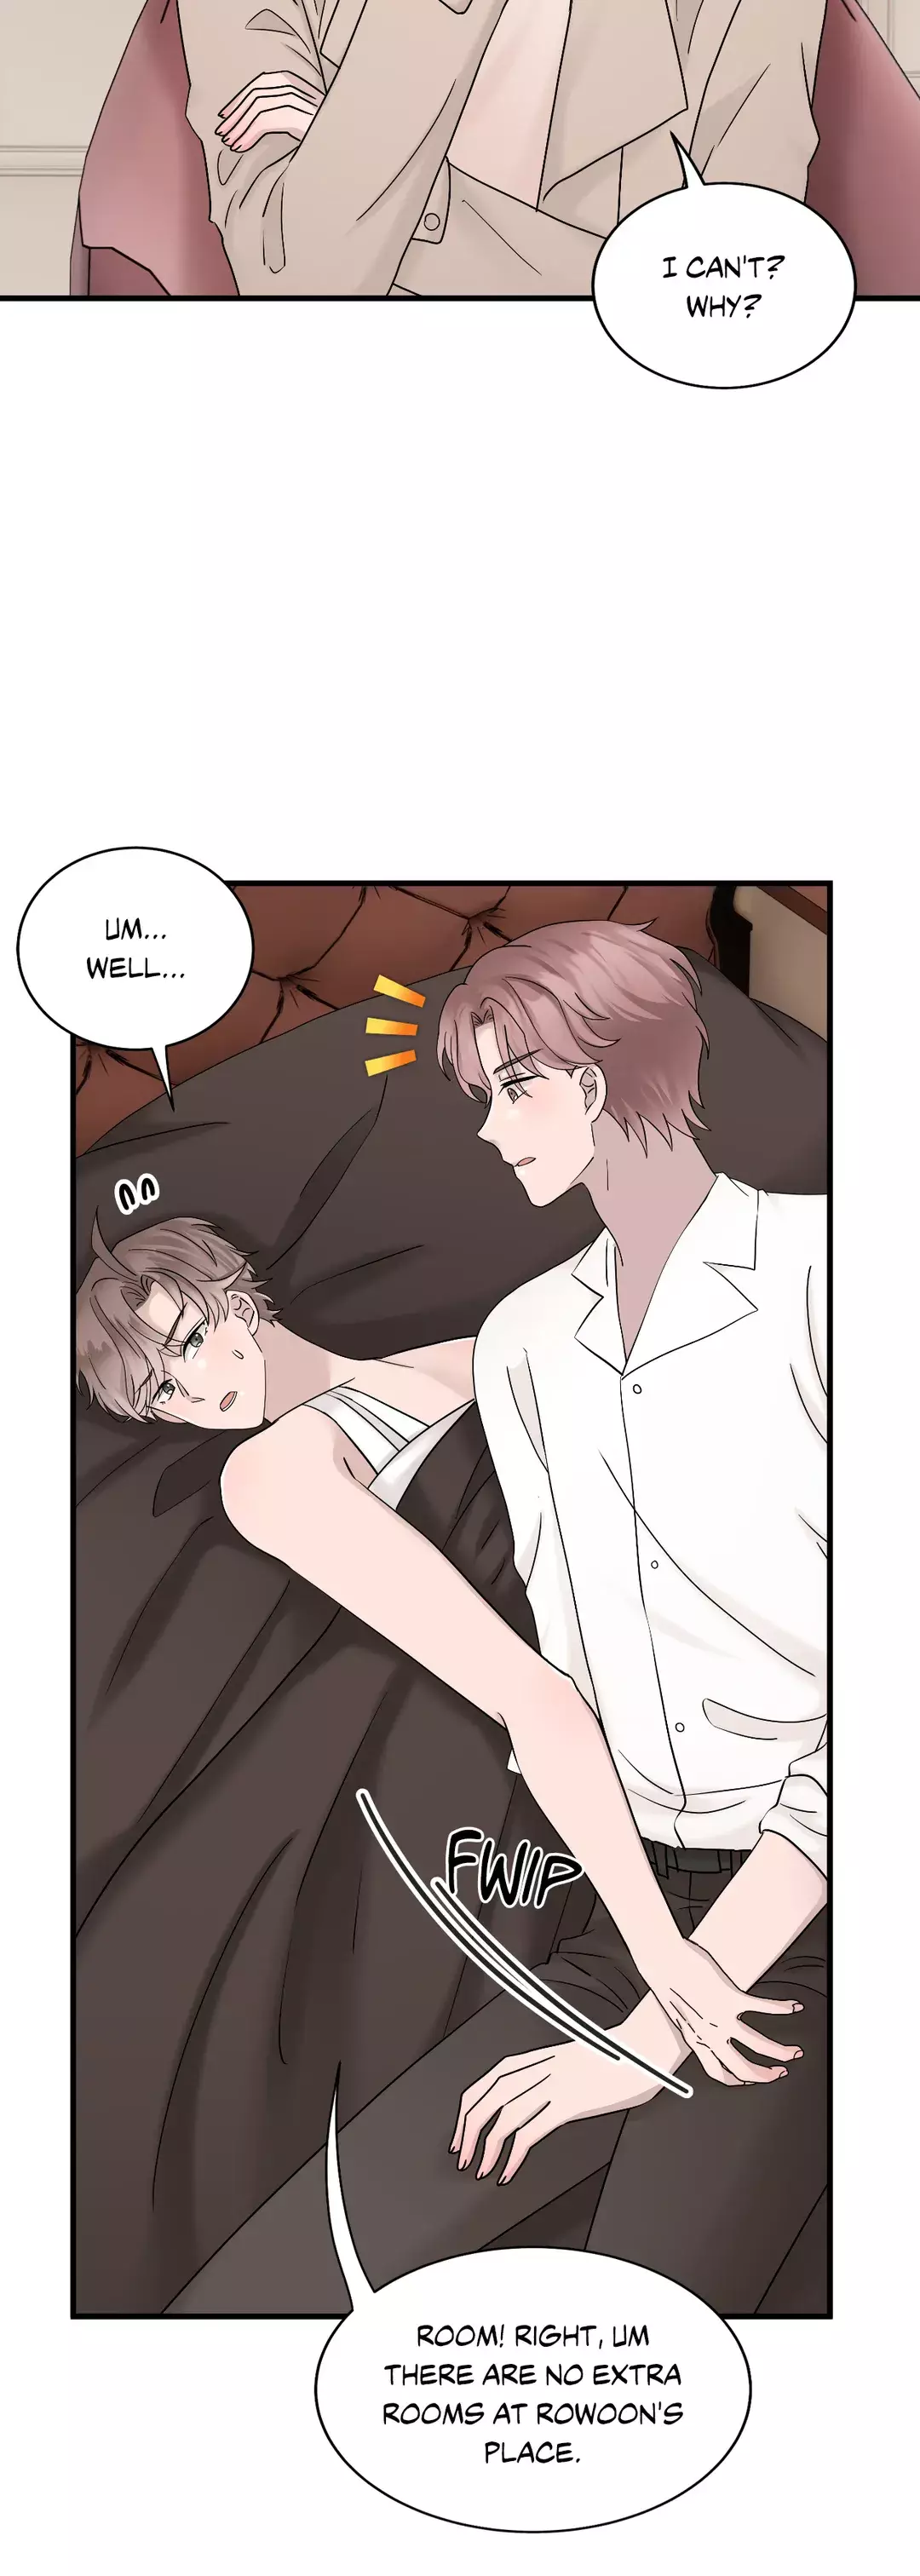 Can't Buy Me Love - 23 page 2-61e289a0